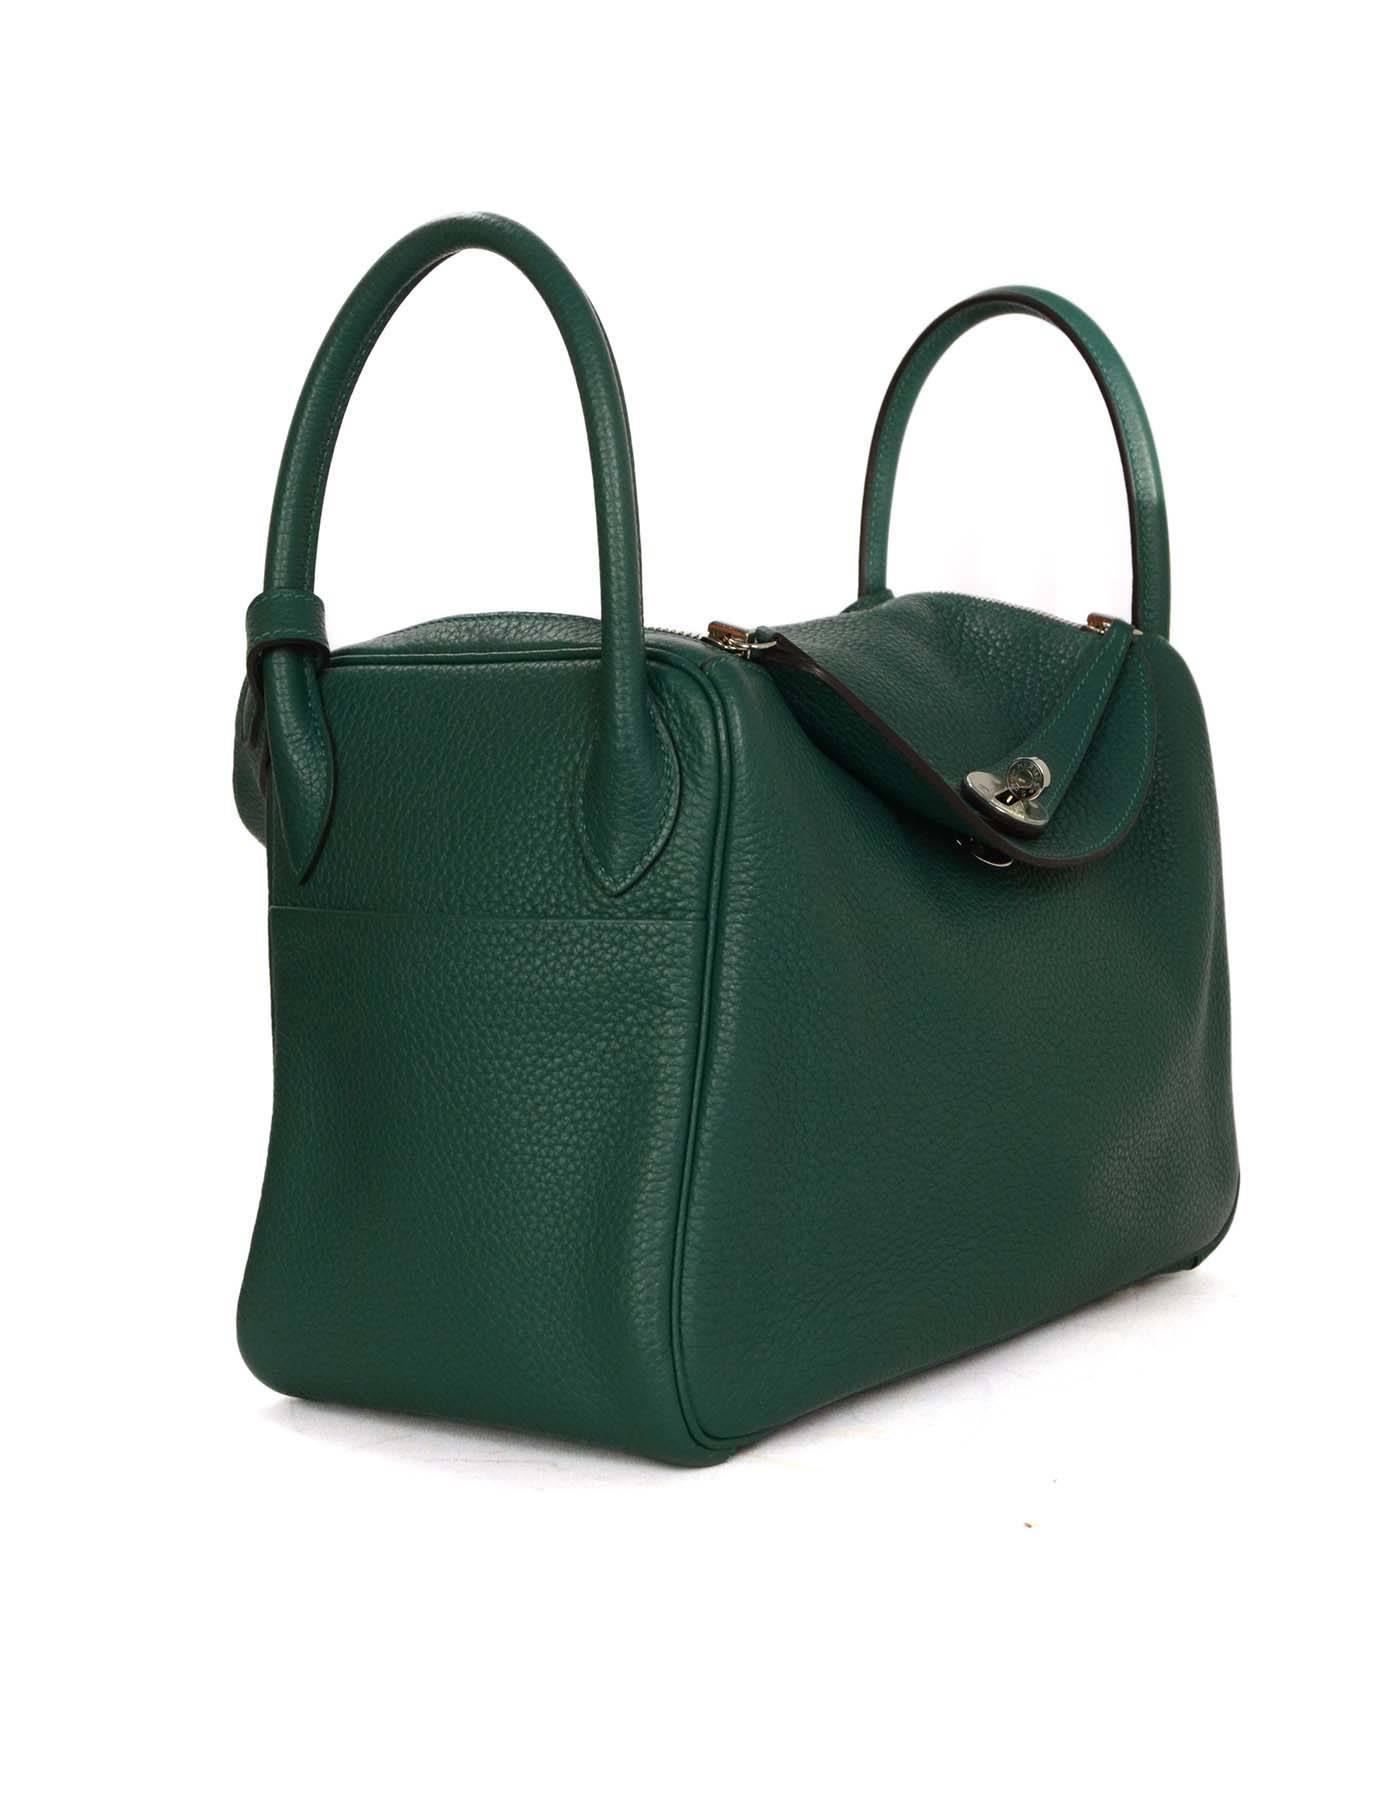 Hermes Malachite Green Clemence 30cm Lindy Bag 

-Made In: France
-Year of Production: 2014
-Color: Malachite green
-Hardware: Palladium
-Materials: Clemence leather
-Lining: Malachite leather
-Closure/Opening: Double sided zip closure with